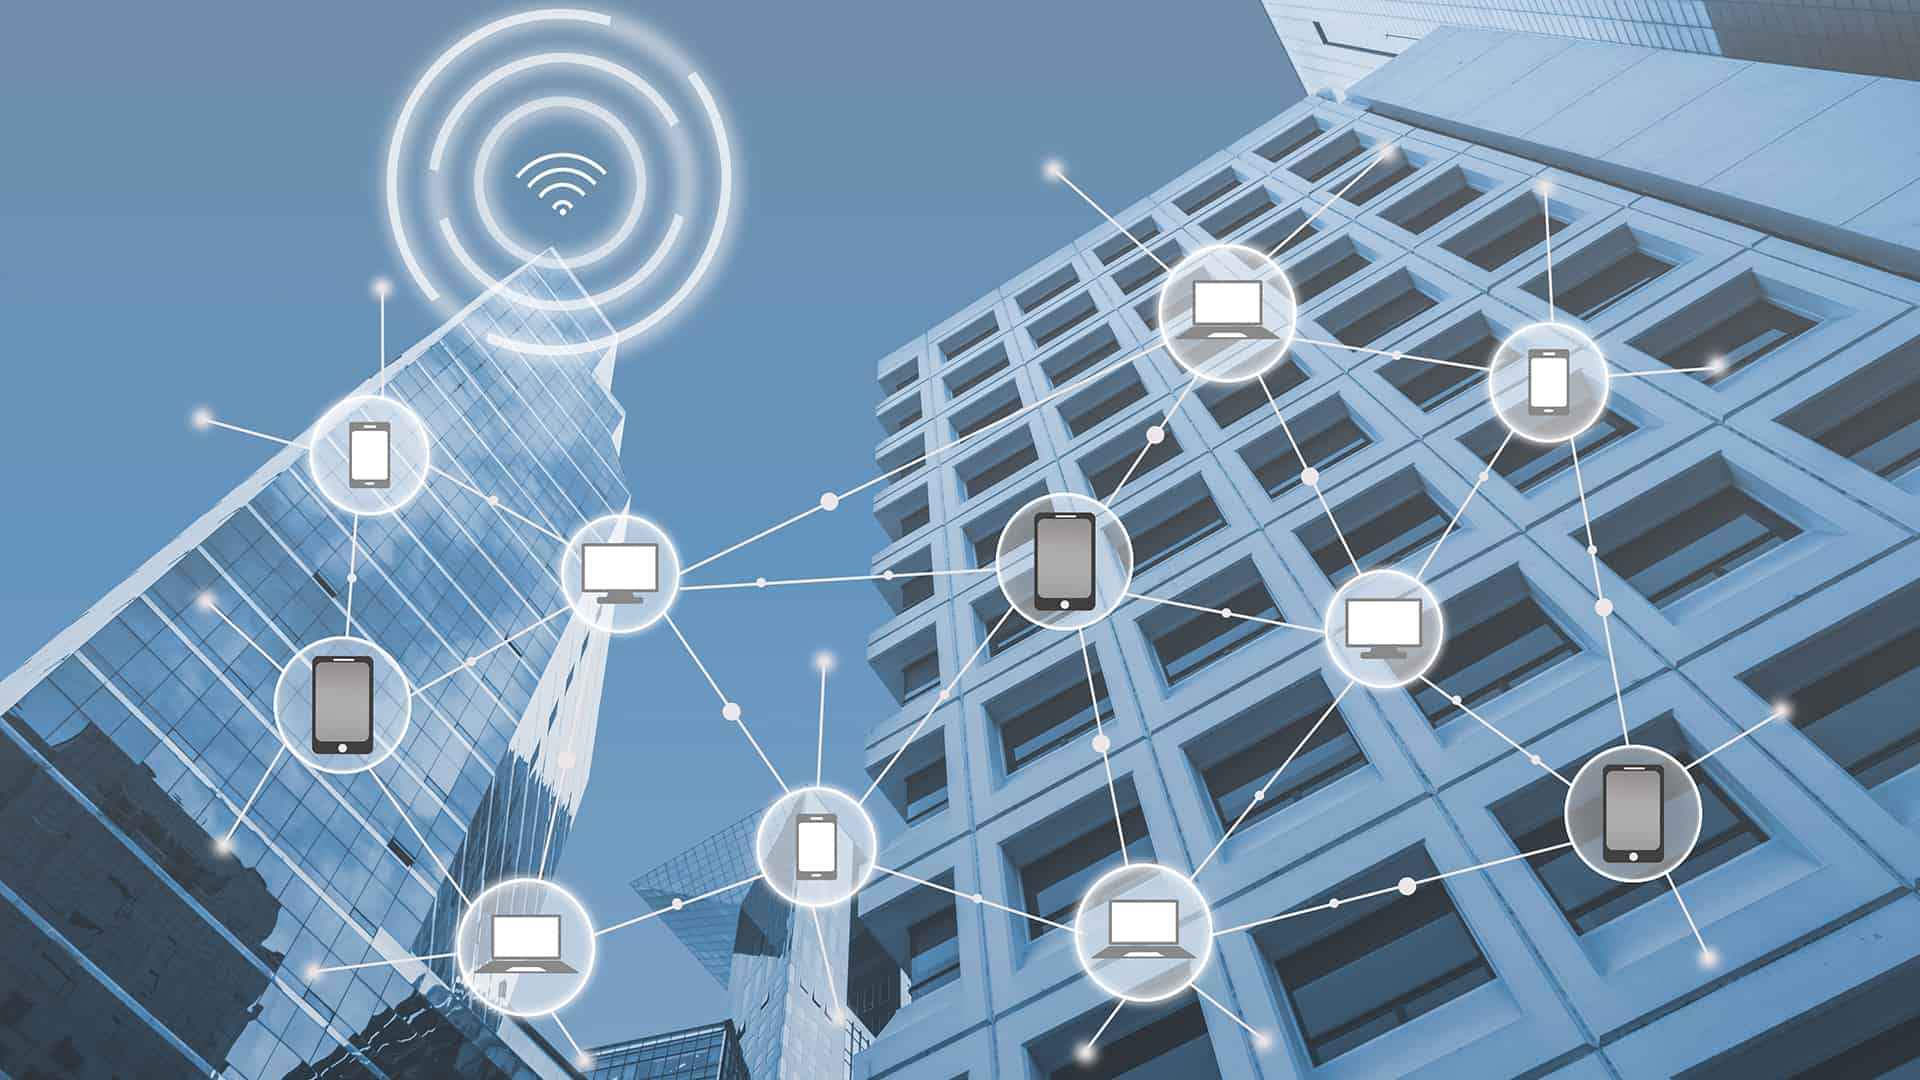 A web of interconnected devices through Wi-Fi are scattered across an apartment building.